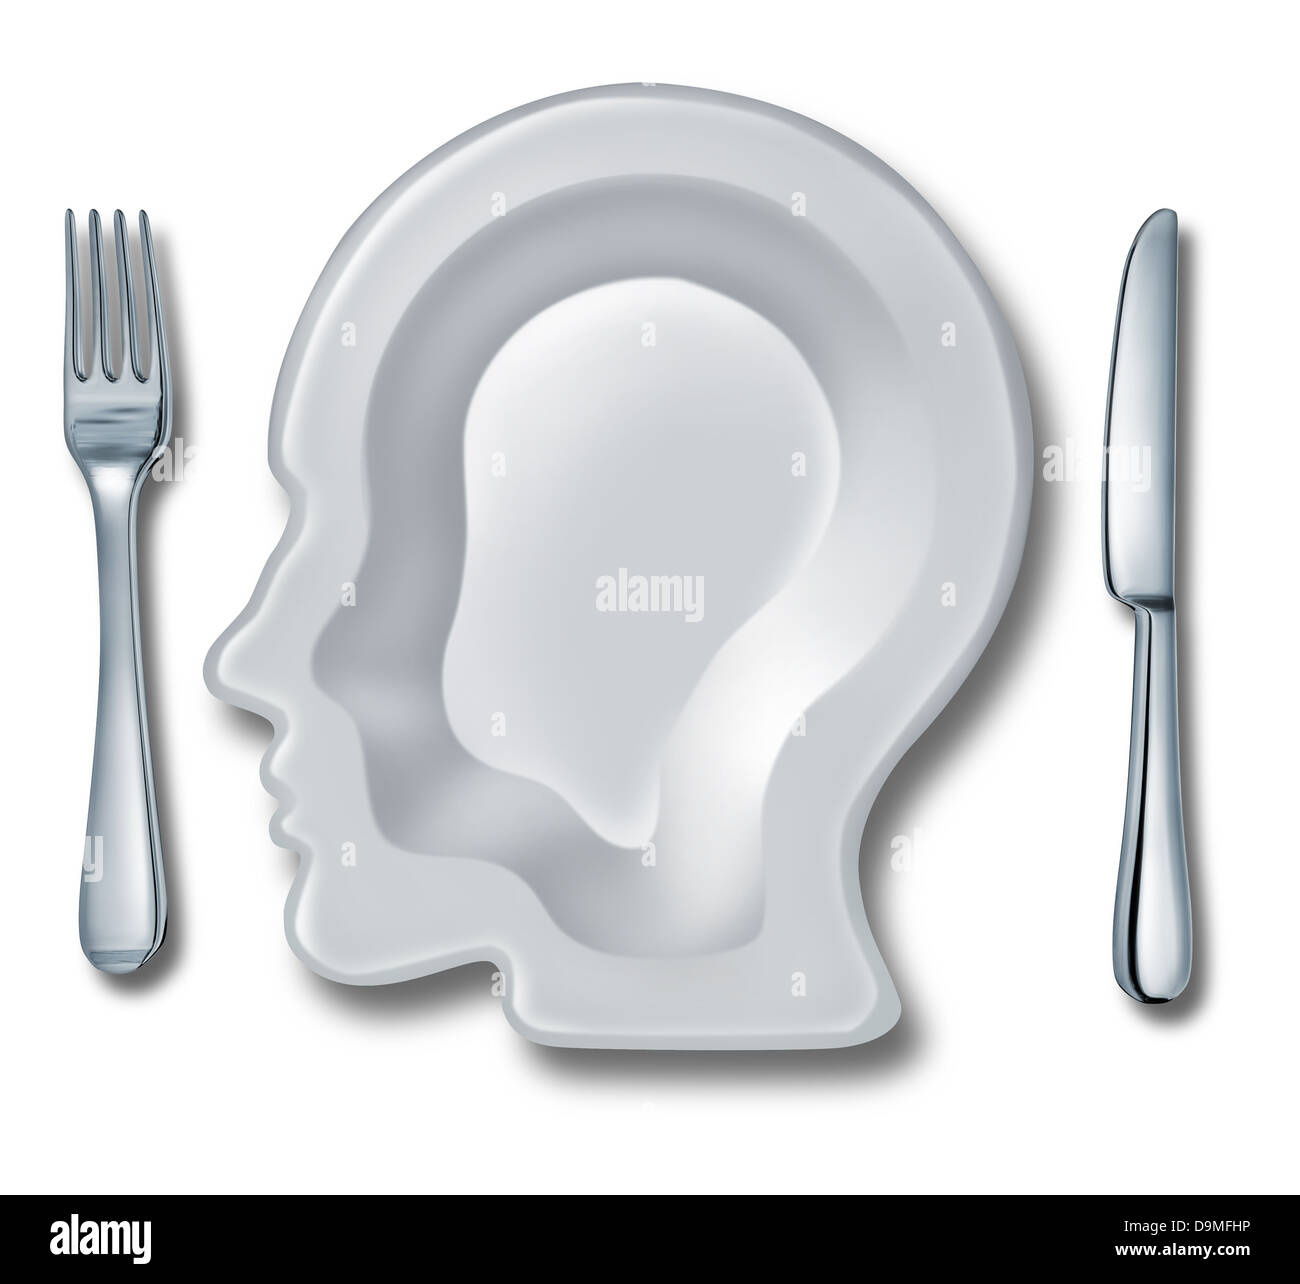 Smart eating and recipe menu planning with a white ceramic plate in the shape of a human head as an intelligent food guide concept for healthy living and dieting choices. Stock Photo